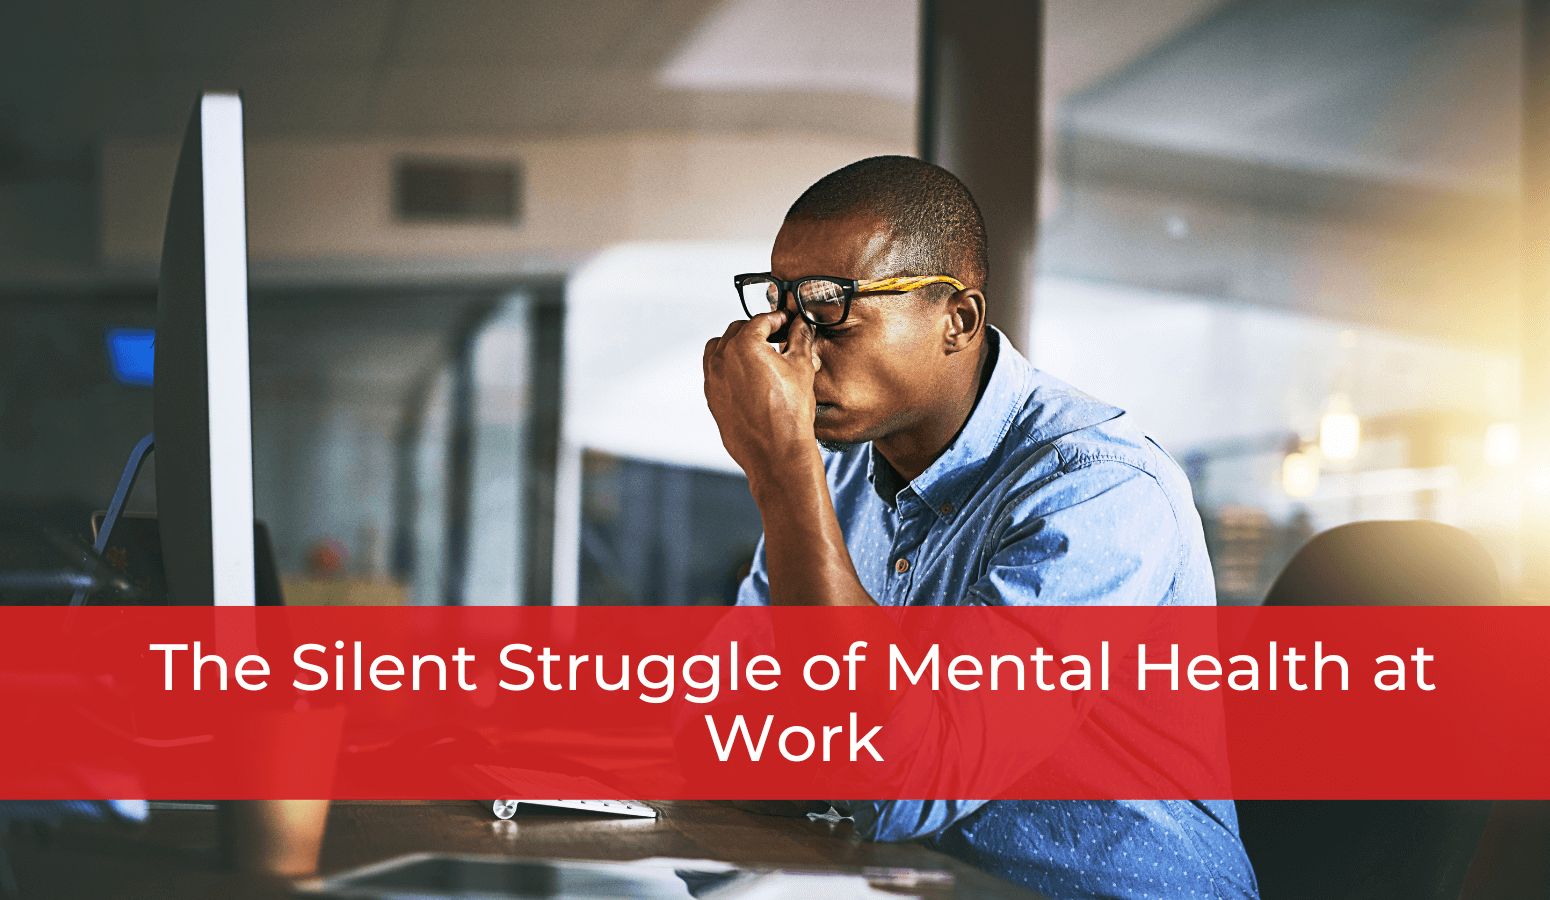 Featured image for “The Silent Struggle of Mental Health at Work”